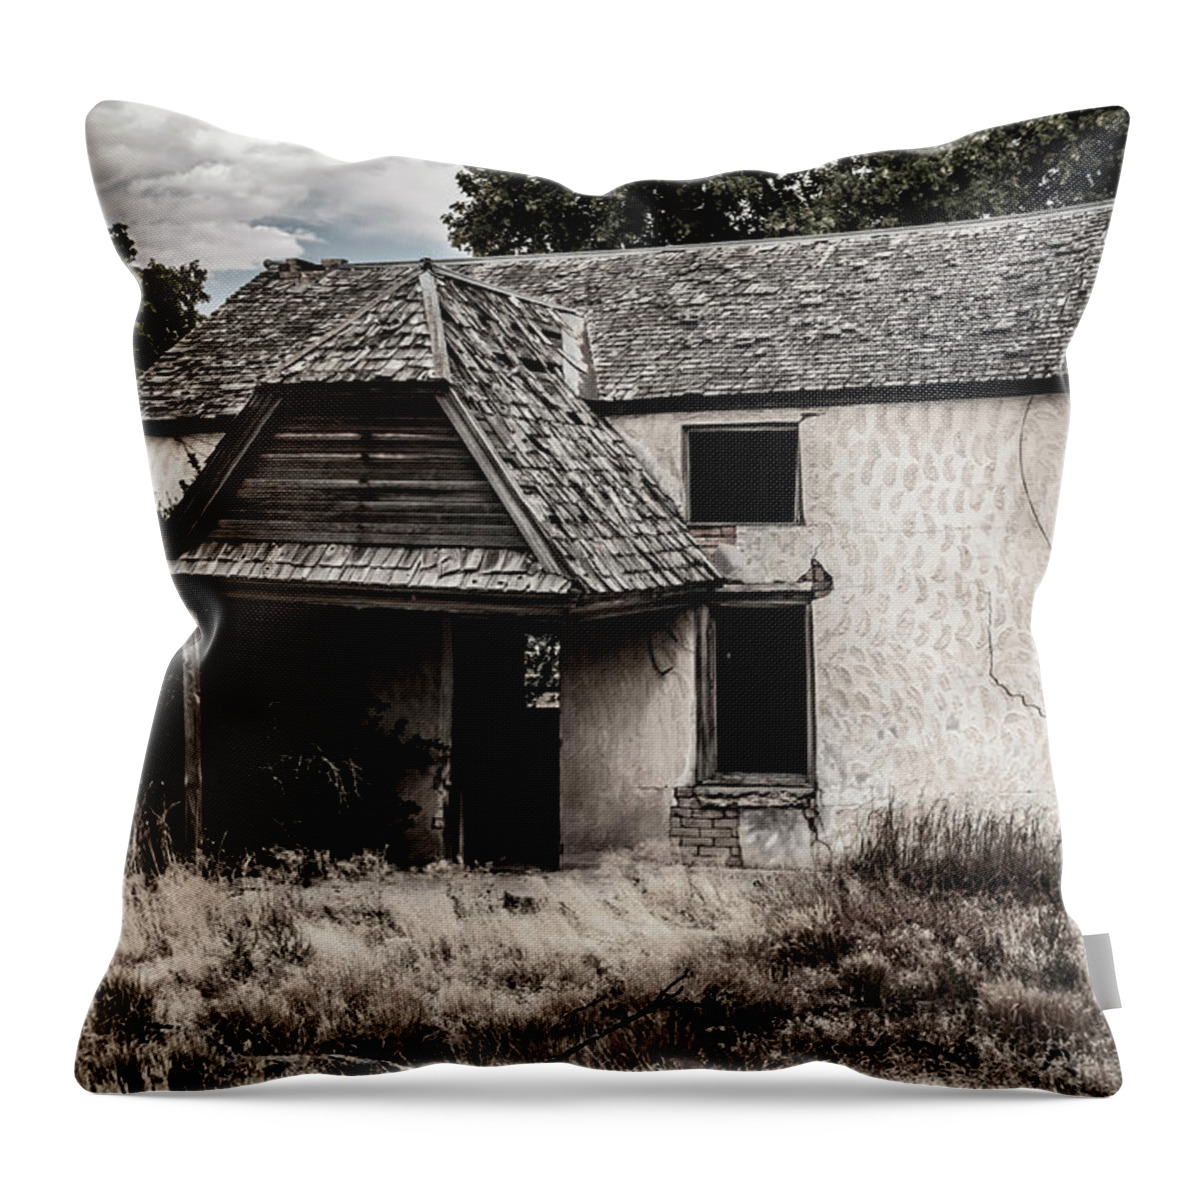 K Bradley Washburn Throw Pillow featuring the photograph The Old Price House by K Bradley Washburn